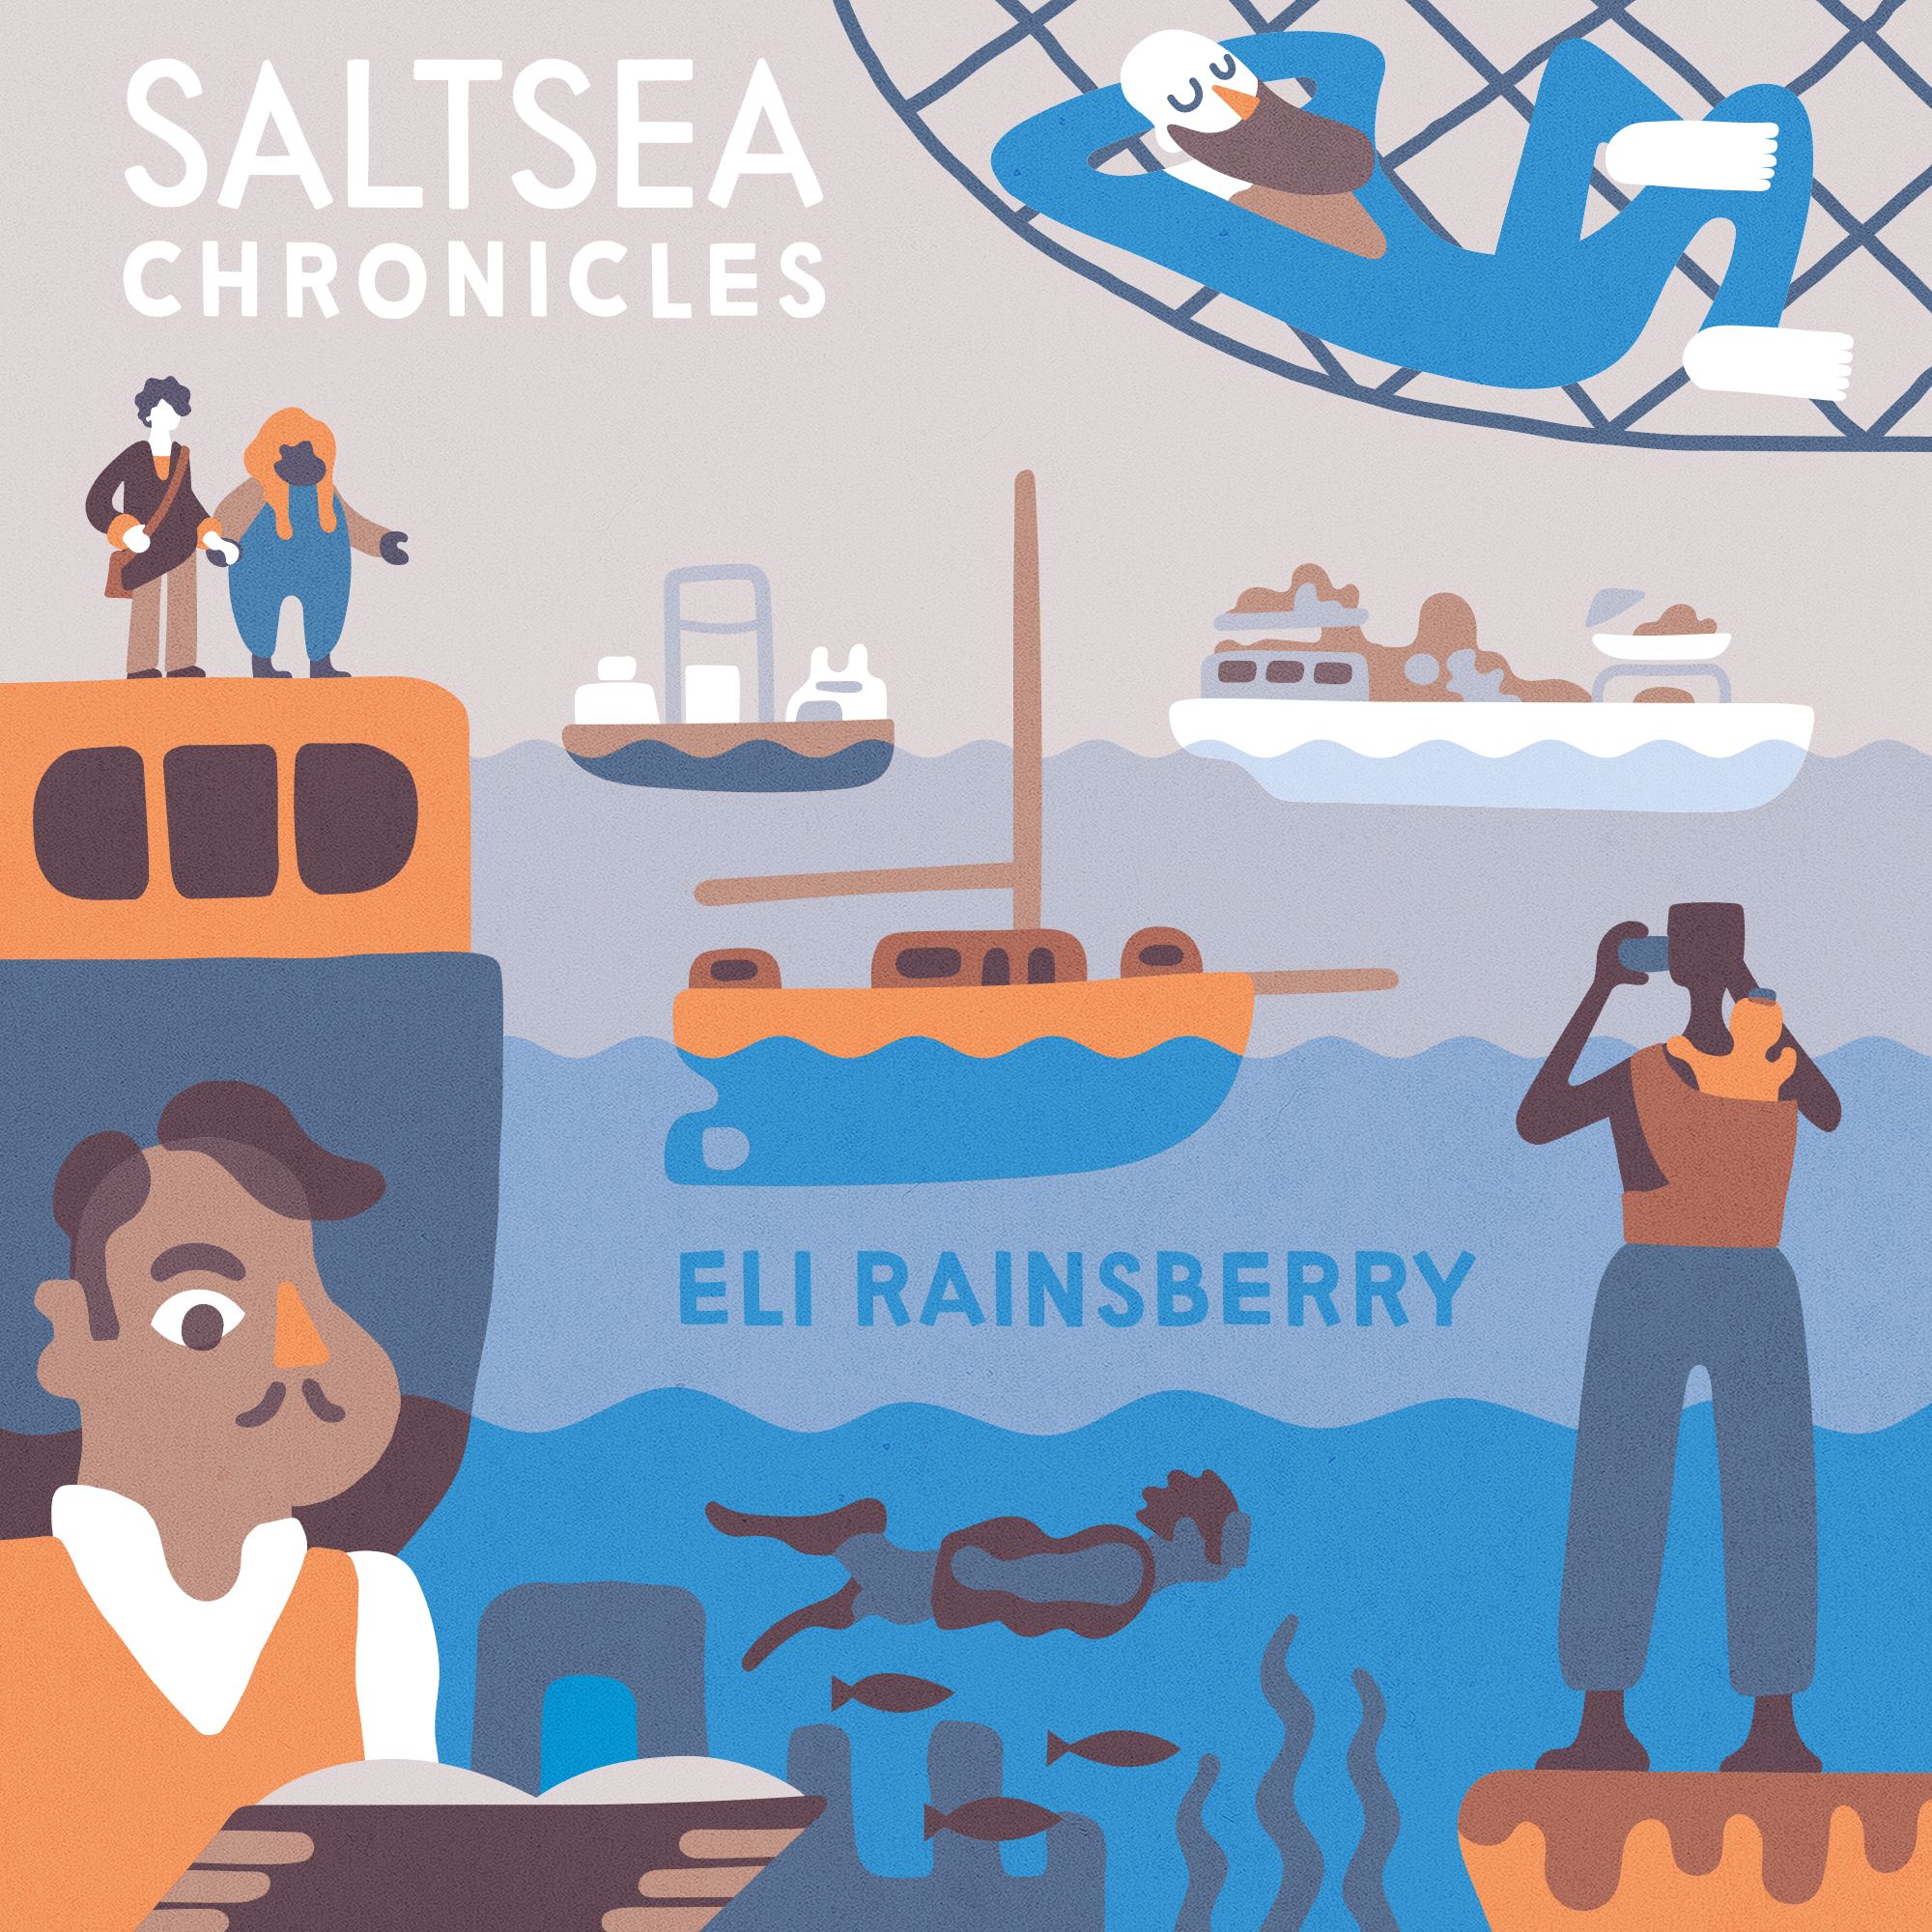 An image of the Saltsea Chronicles album art designed by Nils Deneken featuring characters from the game, above and below water and the text: Saltsea Chronicles, Eli Rainsberry